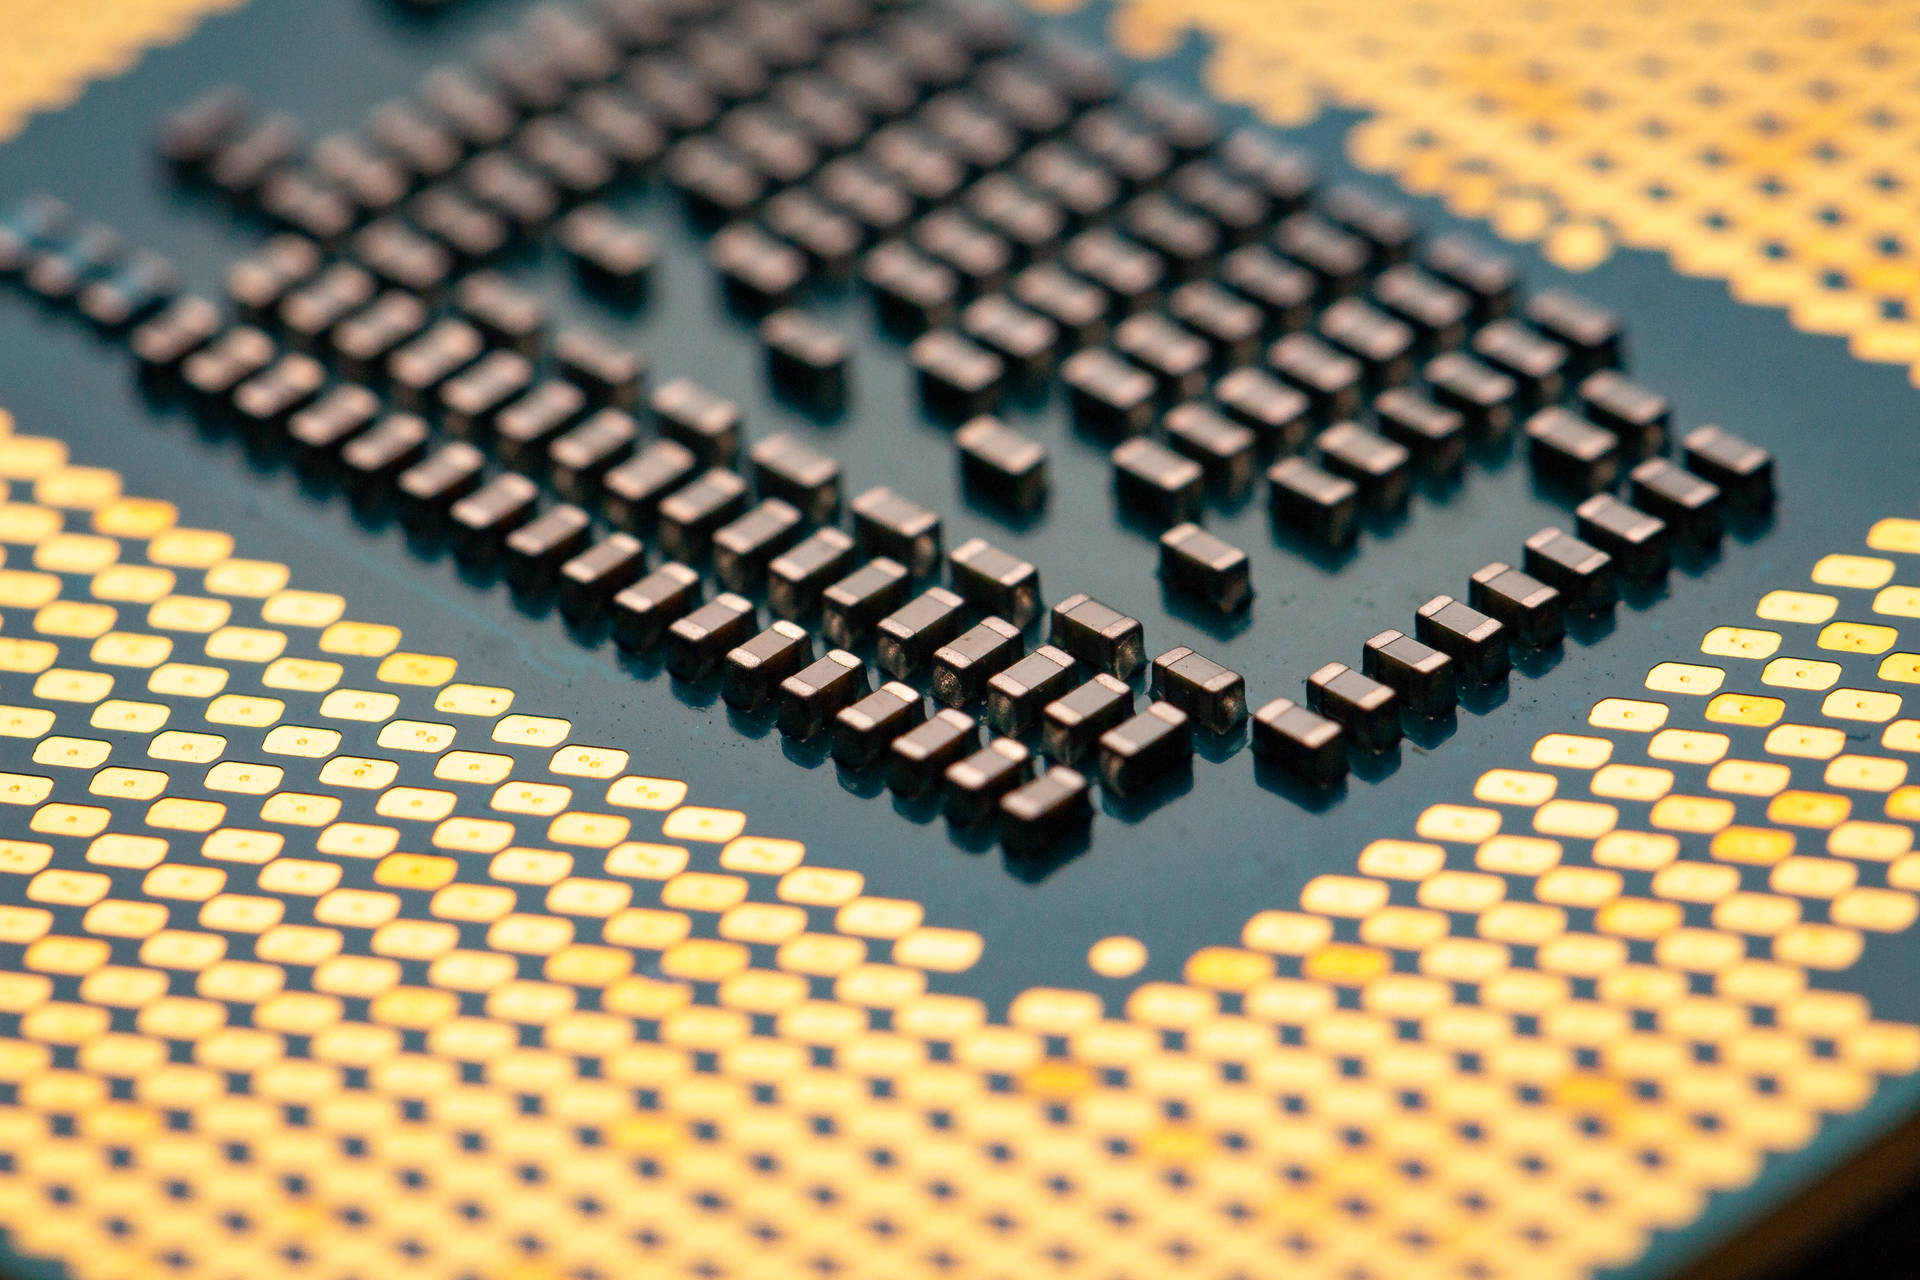 Free Processor Wallpaper Downloads, [100+] Processor Wallpapers for FREE |  